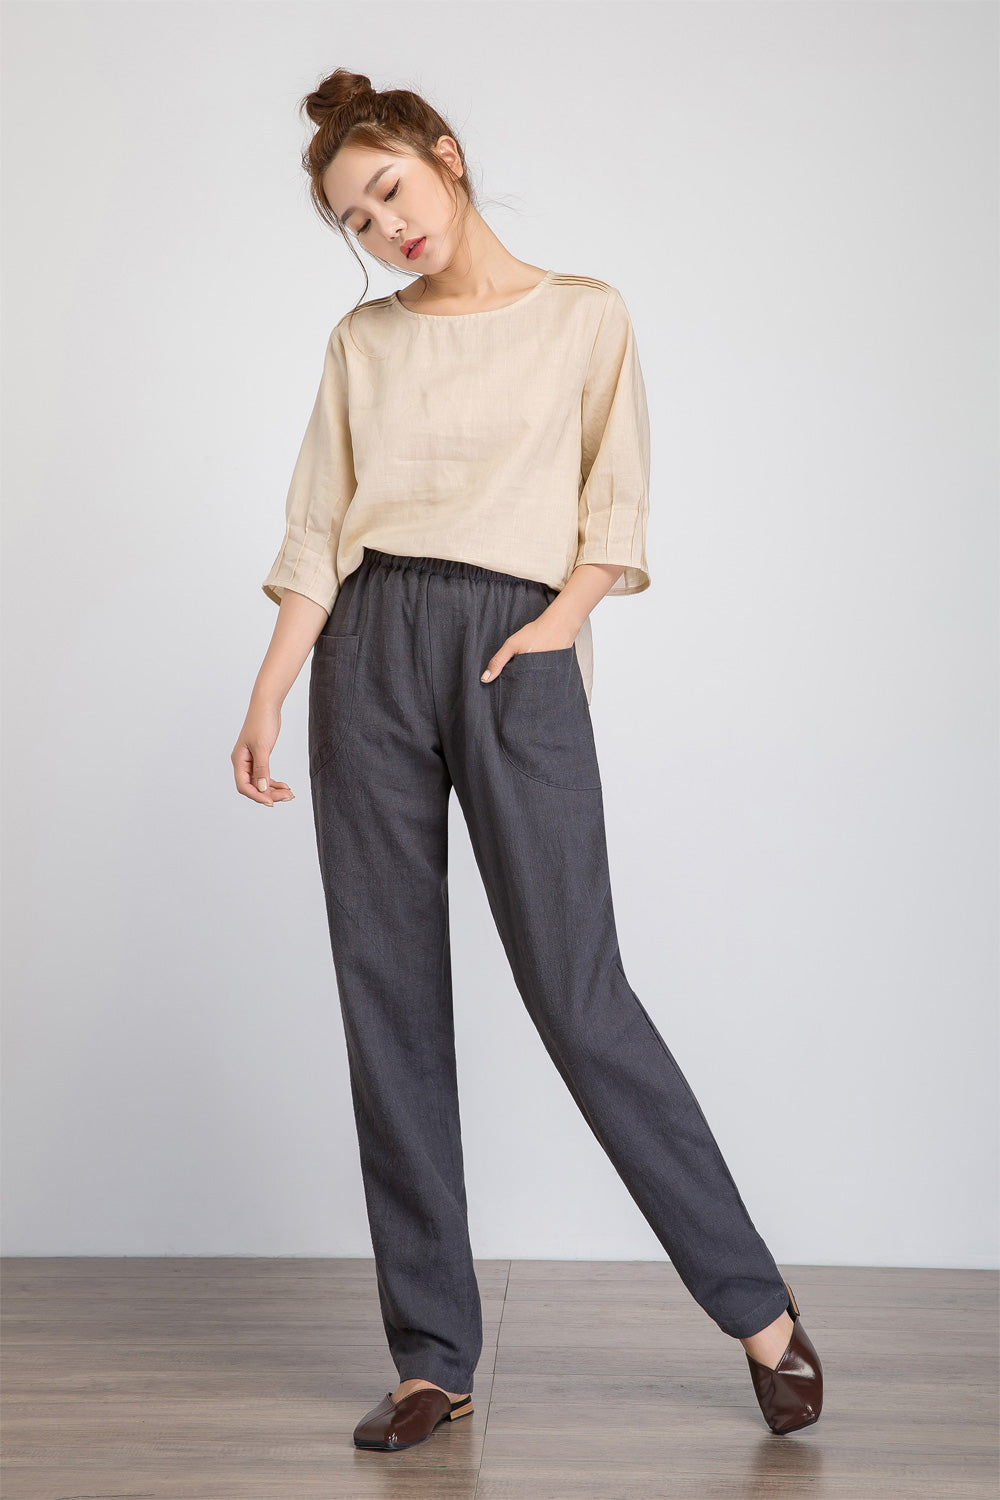 Loose fitting pants